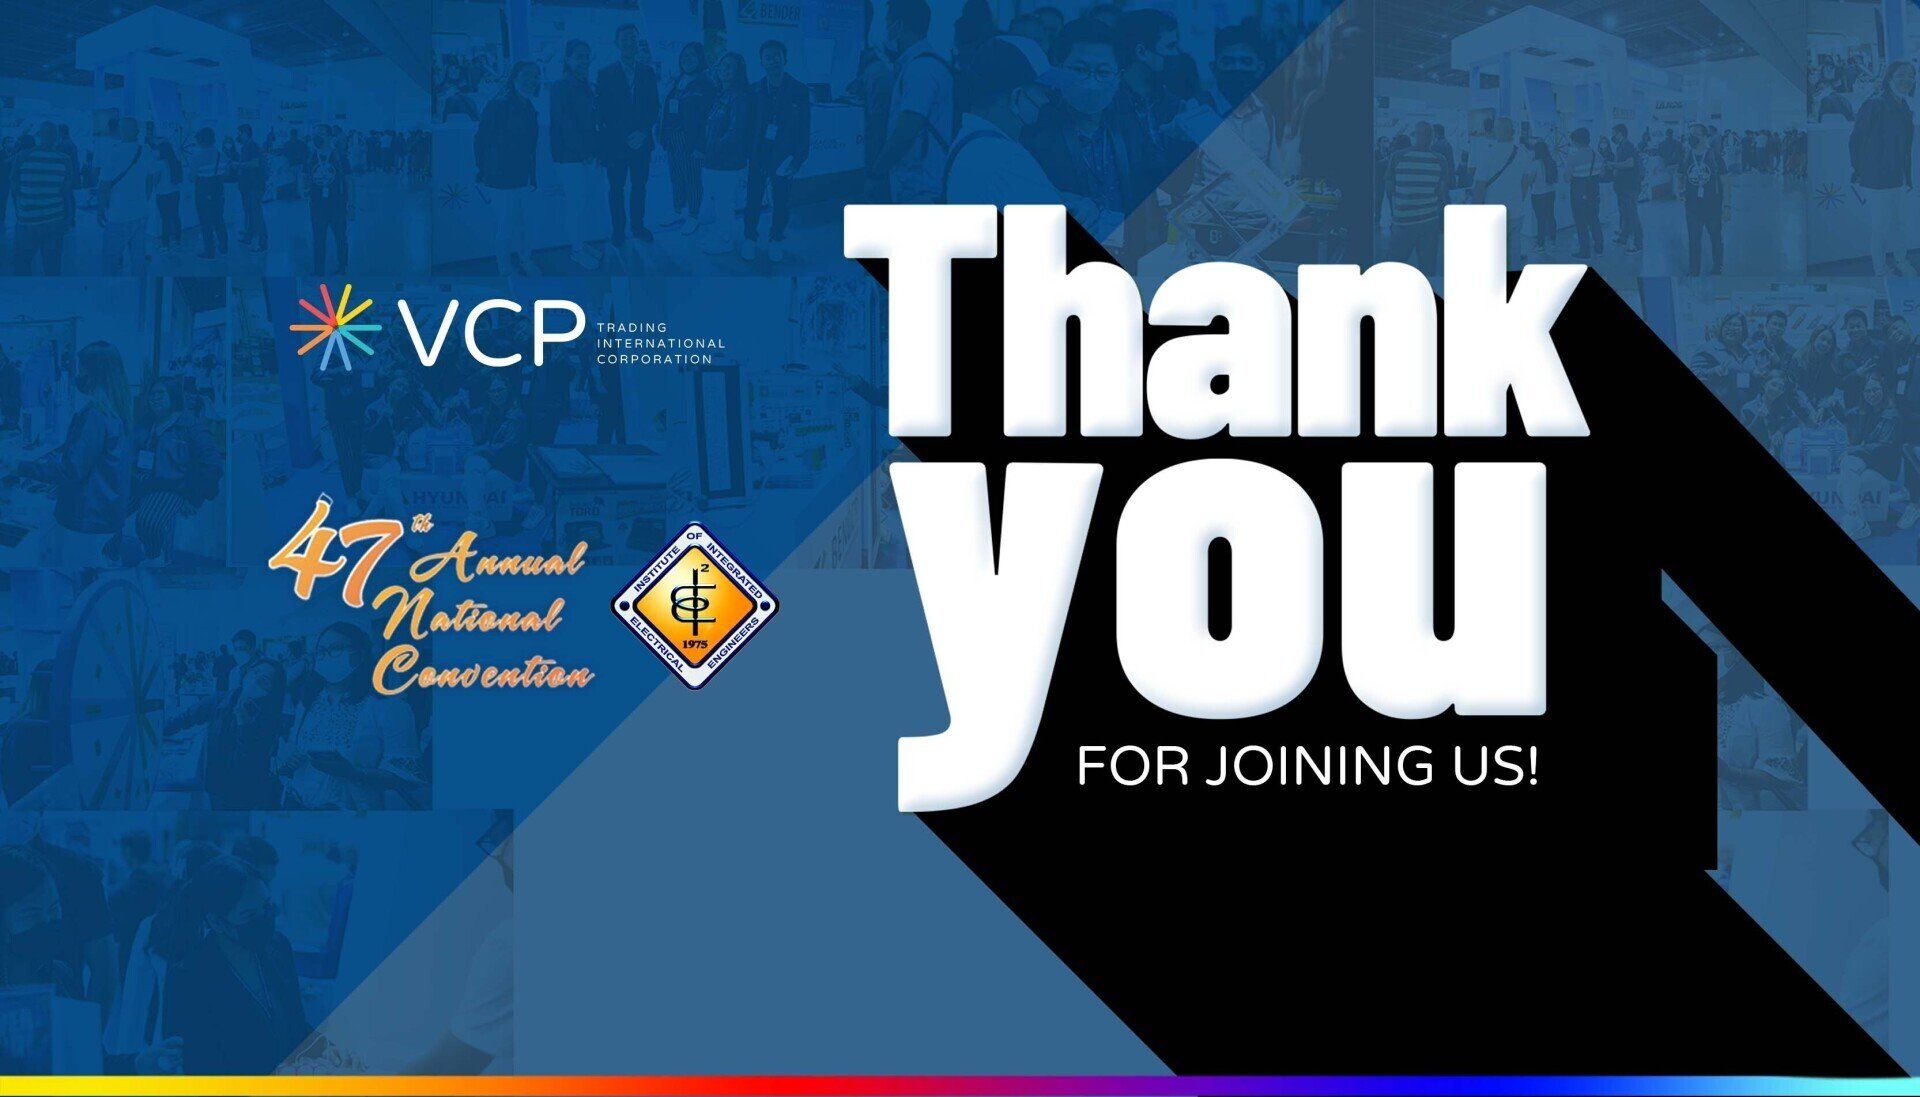 Huge THANK YOU from VCP Trading! - We appreciate your visit at our booth in IIEE-Annual National Con